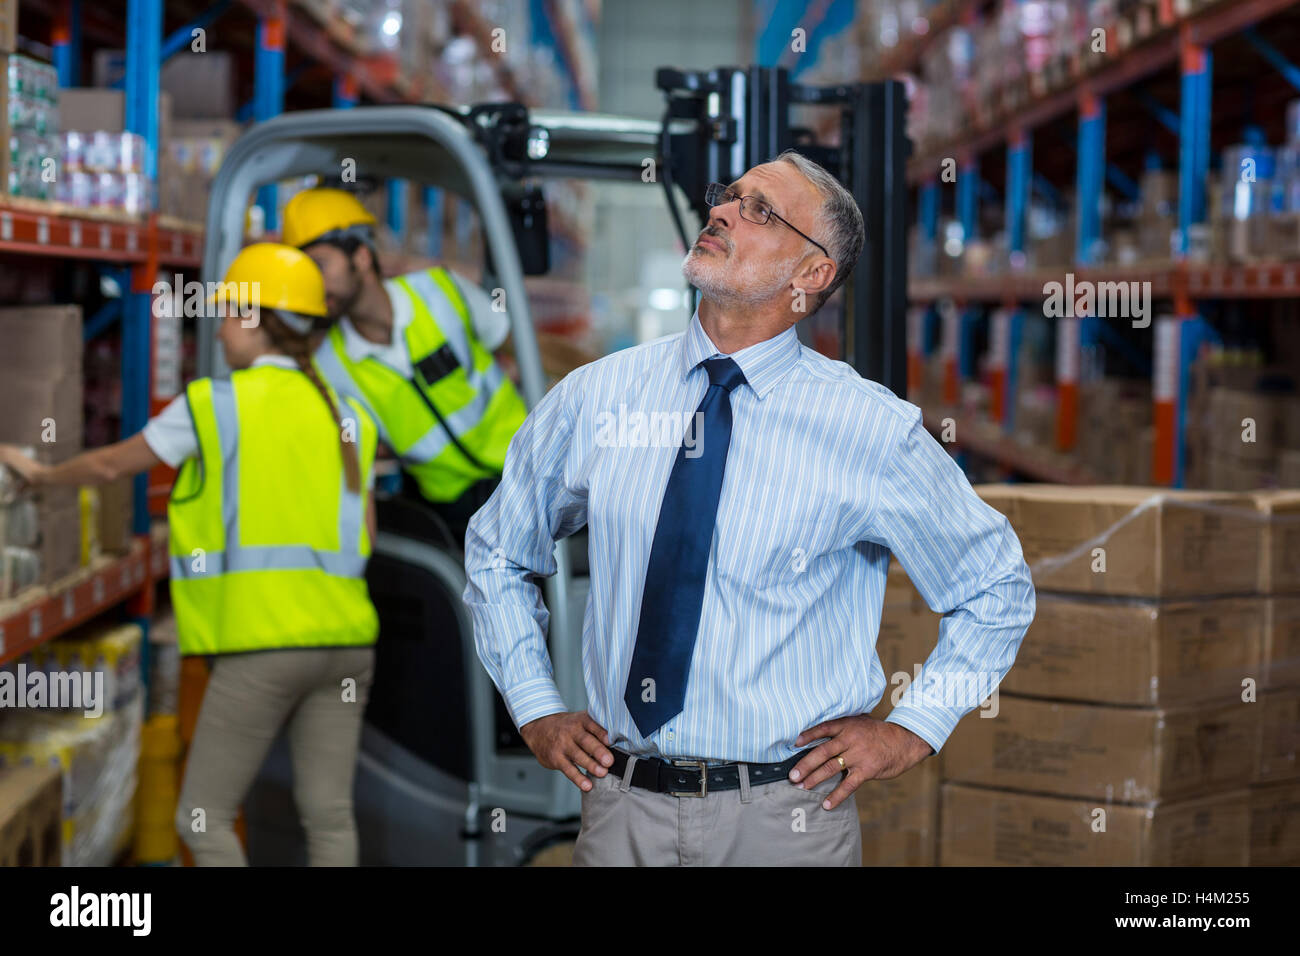 Warehouse manager standing with hands on hips Stock Photo